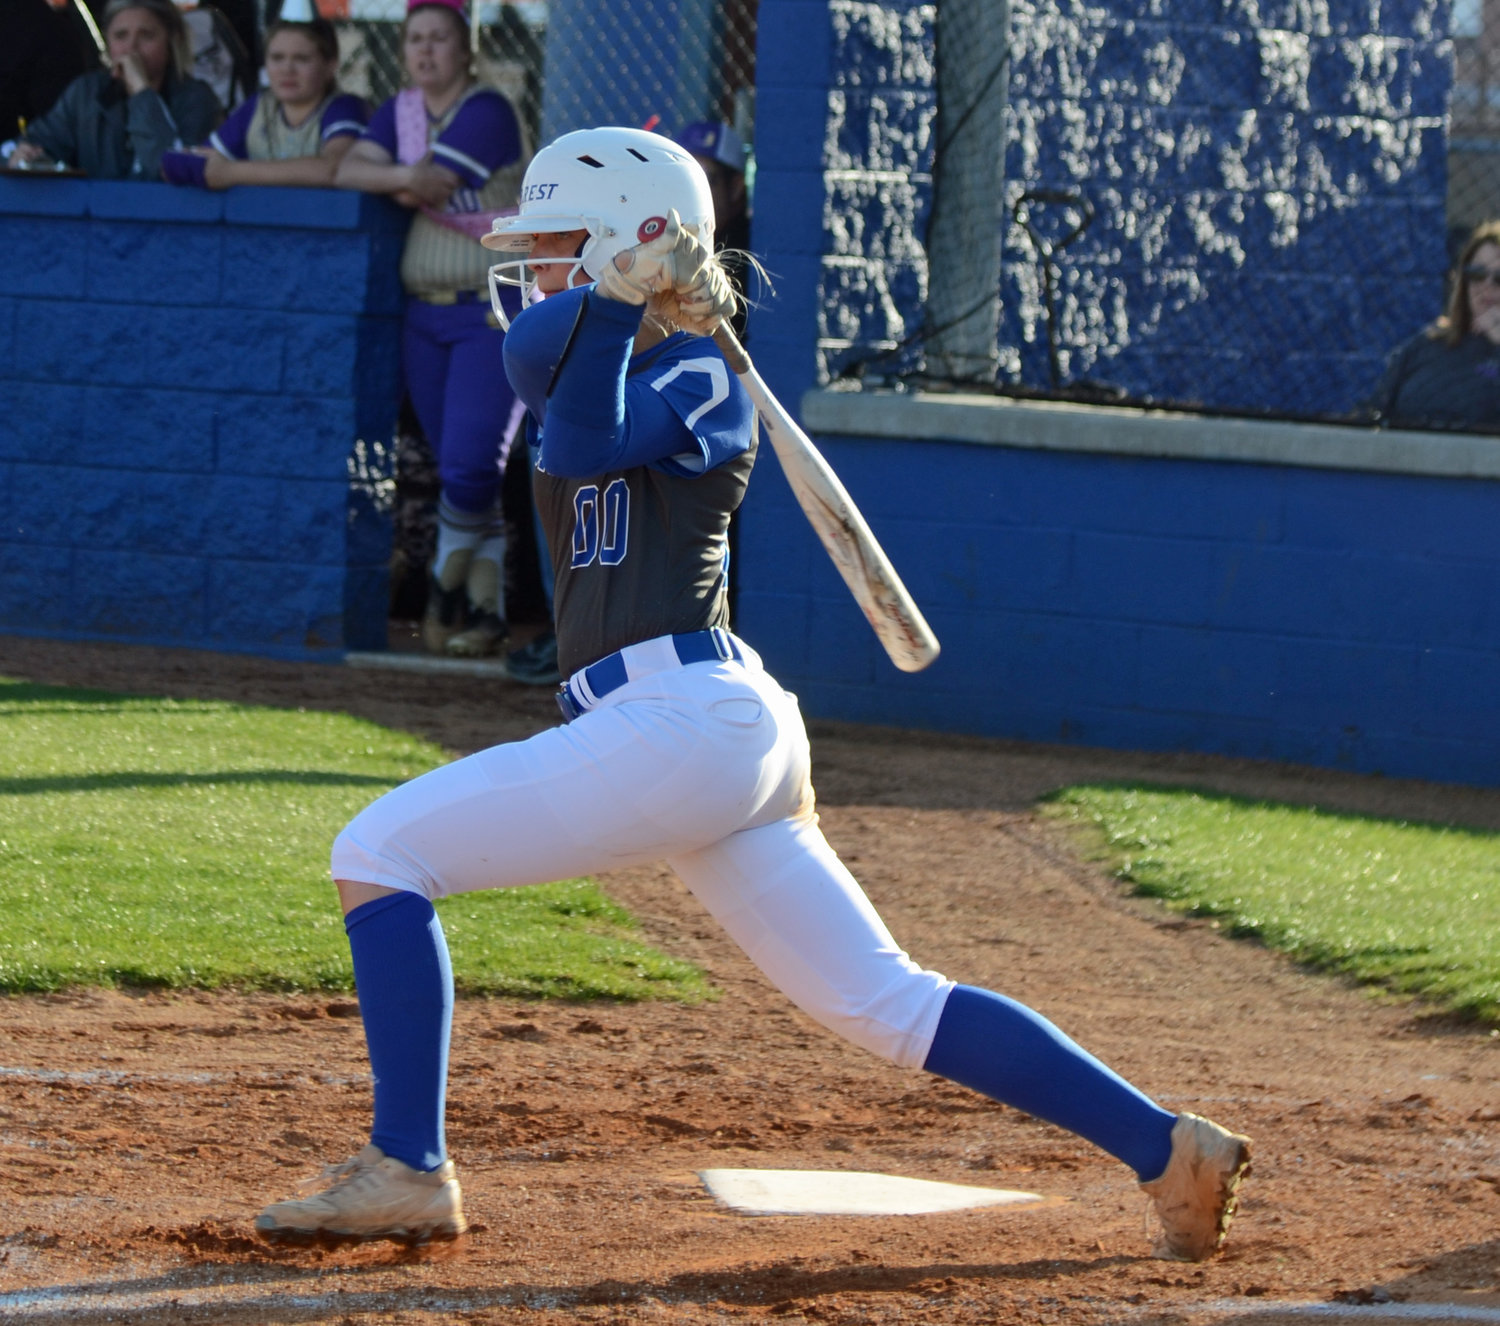 Abby Ferguson had another big night for the Lady Rockets with two hits, three runs scored, and an RBI.